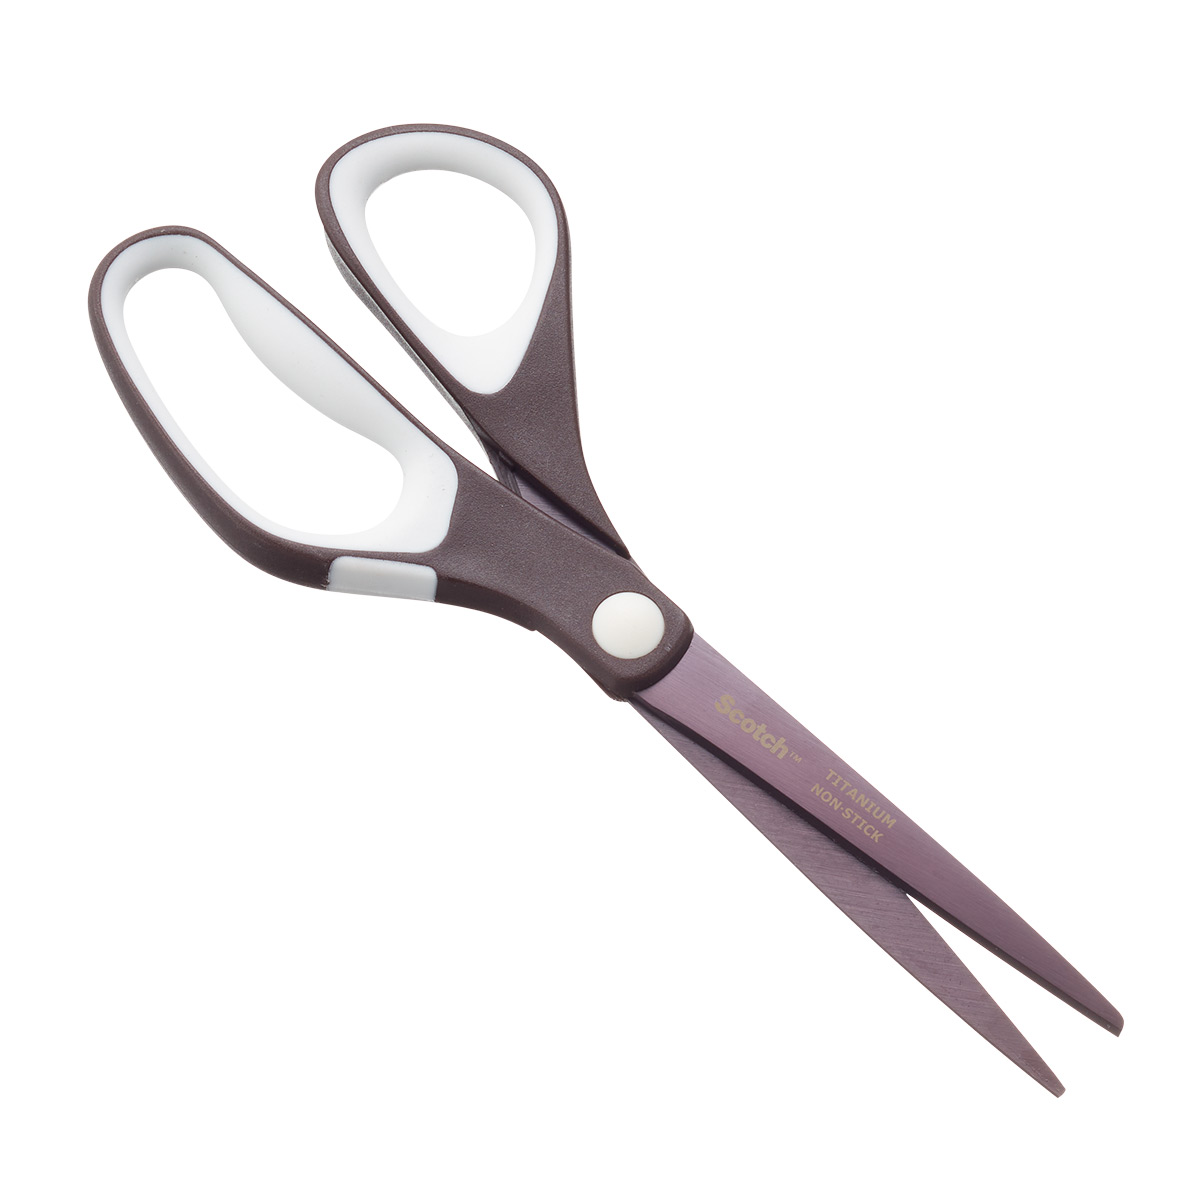 3M Scotch Scissors Express Unpacking Office Home Scissors Non-stick  Specially Coated Stainless Steel Creative Multifunctional